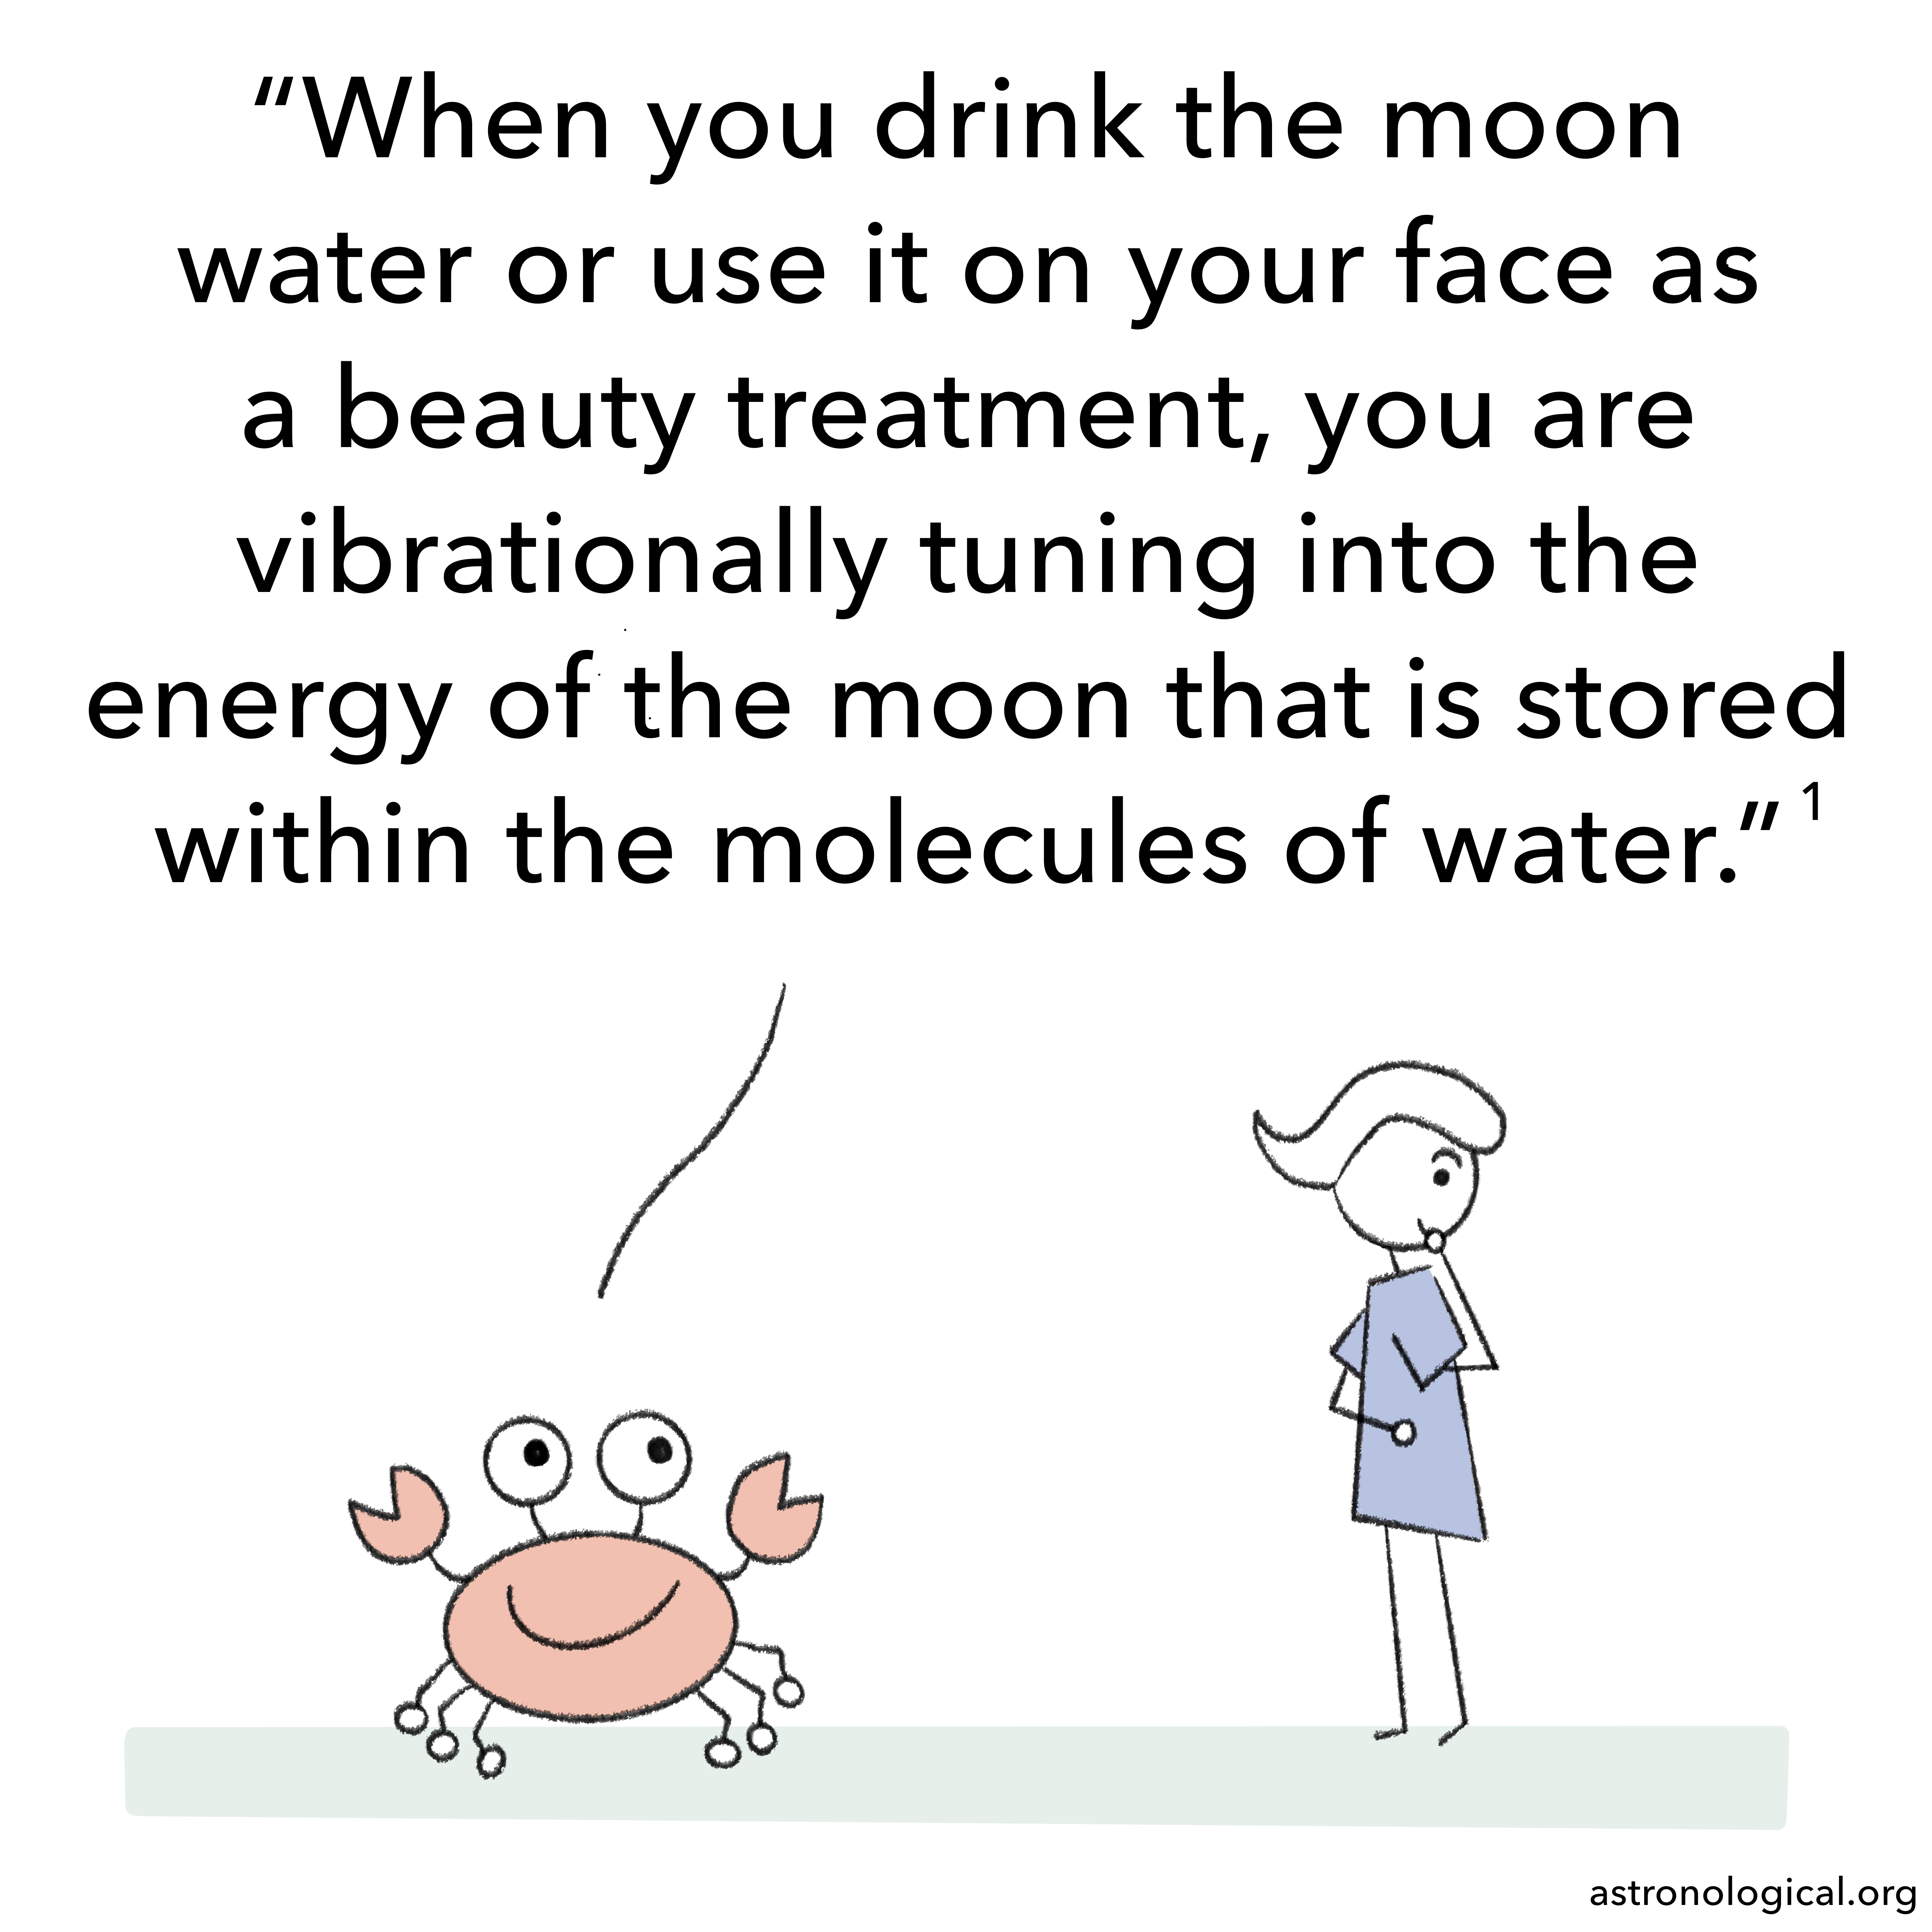 The crab continues: When you drink the moon water or use it on your face as a beauty treatment, you are vibrationally tuning into the energy of the moon that is stored within the molecules of water.The girl’s head is still turned and she is smirking with one hand over her mouth.